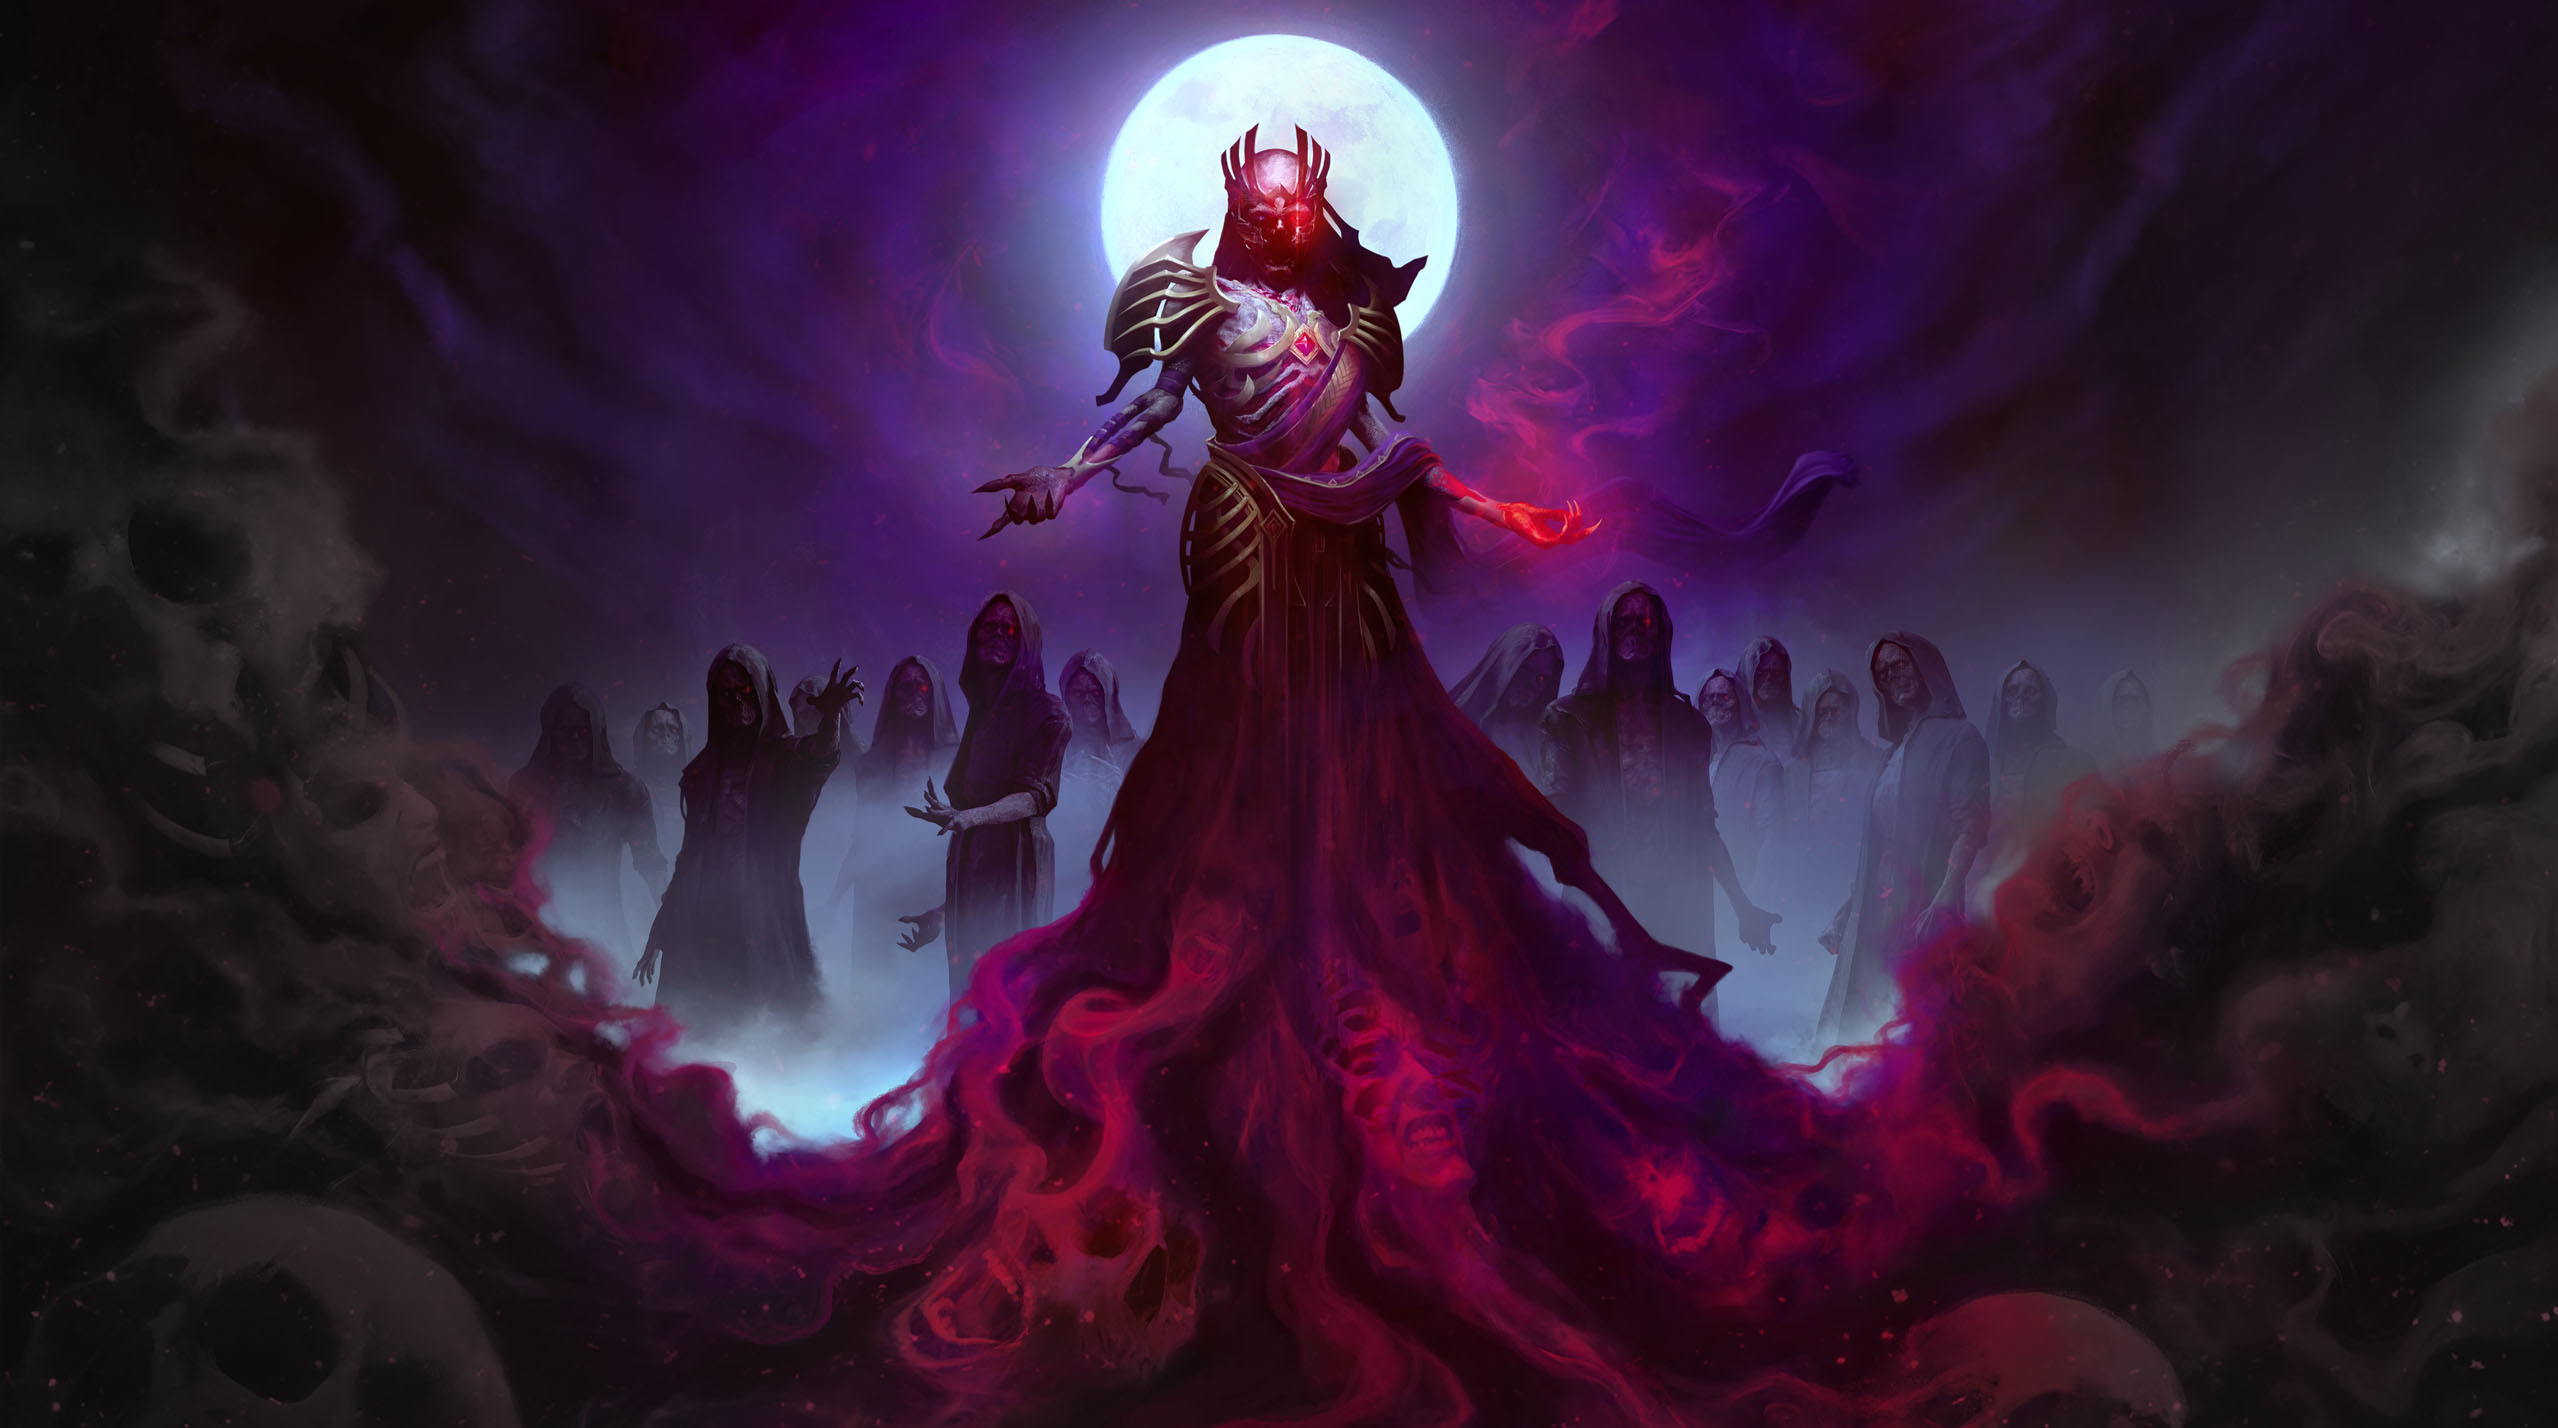 Vecna resplendent in purple robes beneath a full moon. Ghastly faces make up the red smoke at his feet.